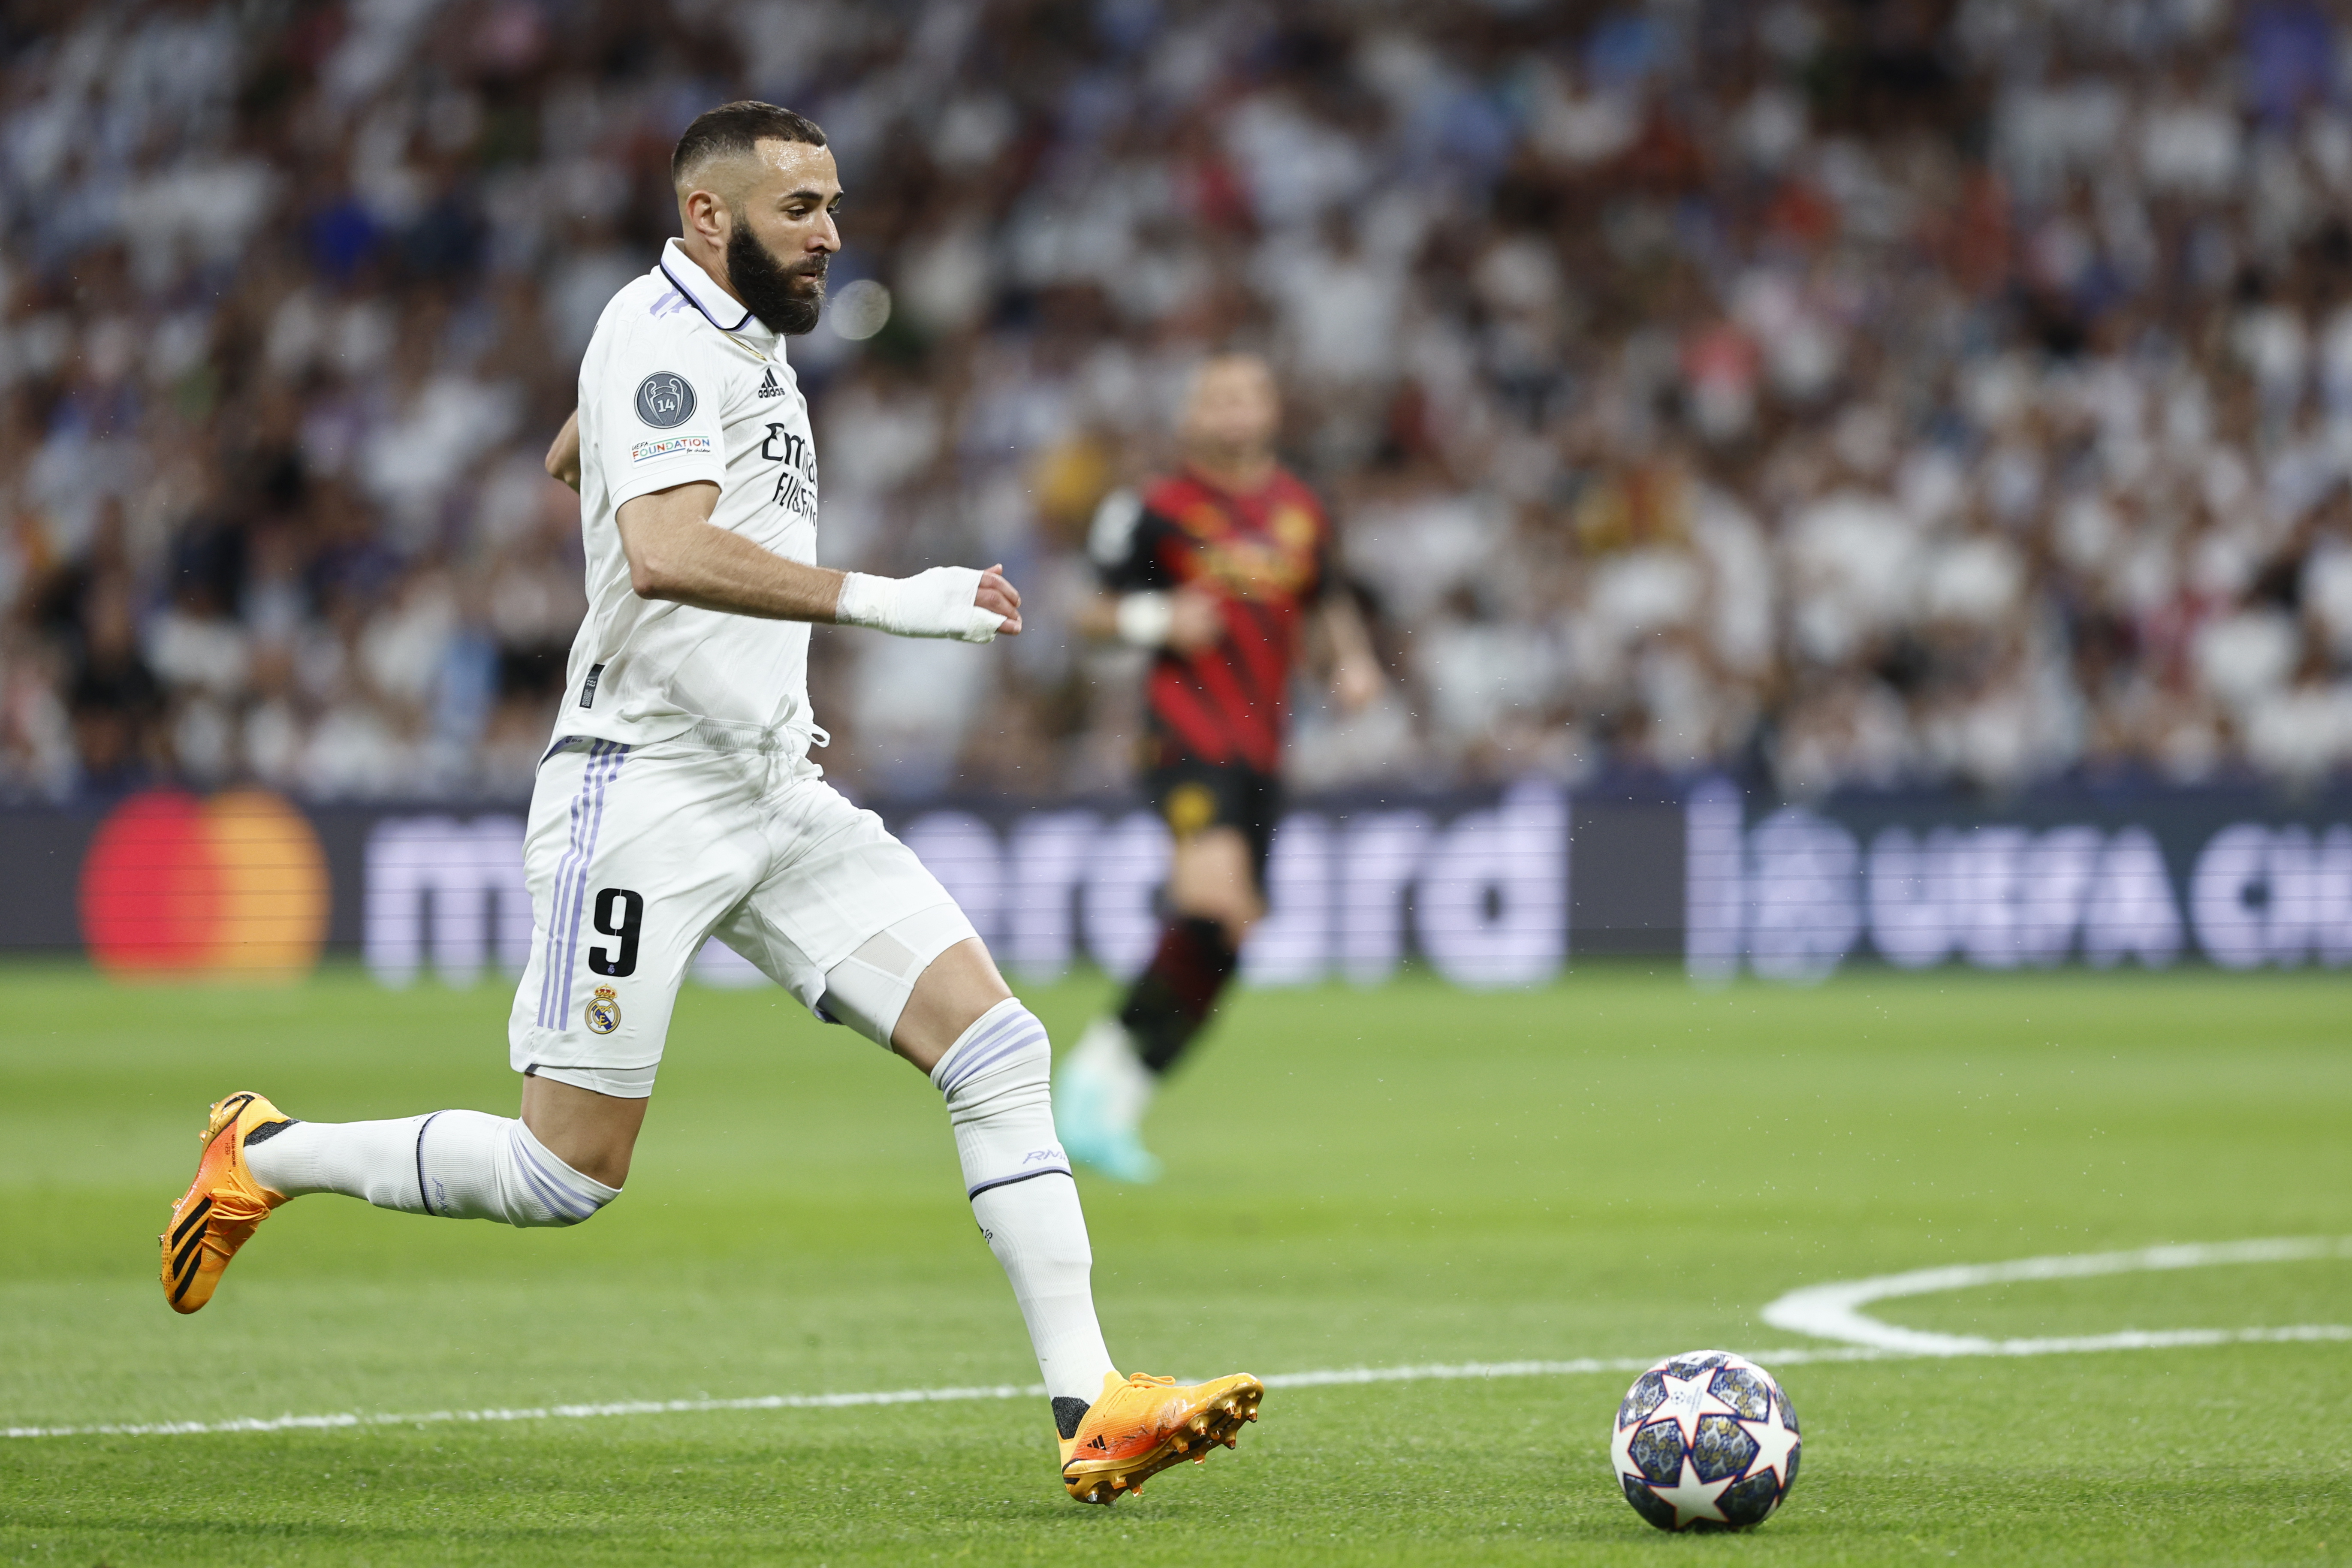 Karim Benzema - 6. Led the line well as usual but didn't pose much of a goal threat. His best chance came with a header which Ederson palmed away. EPA